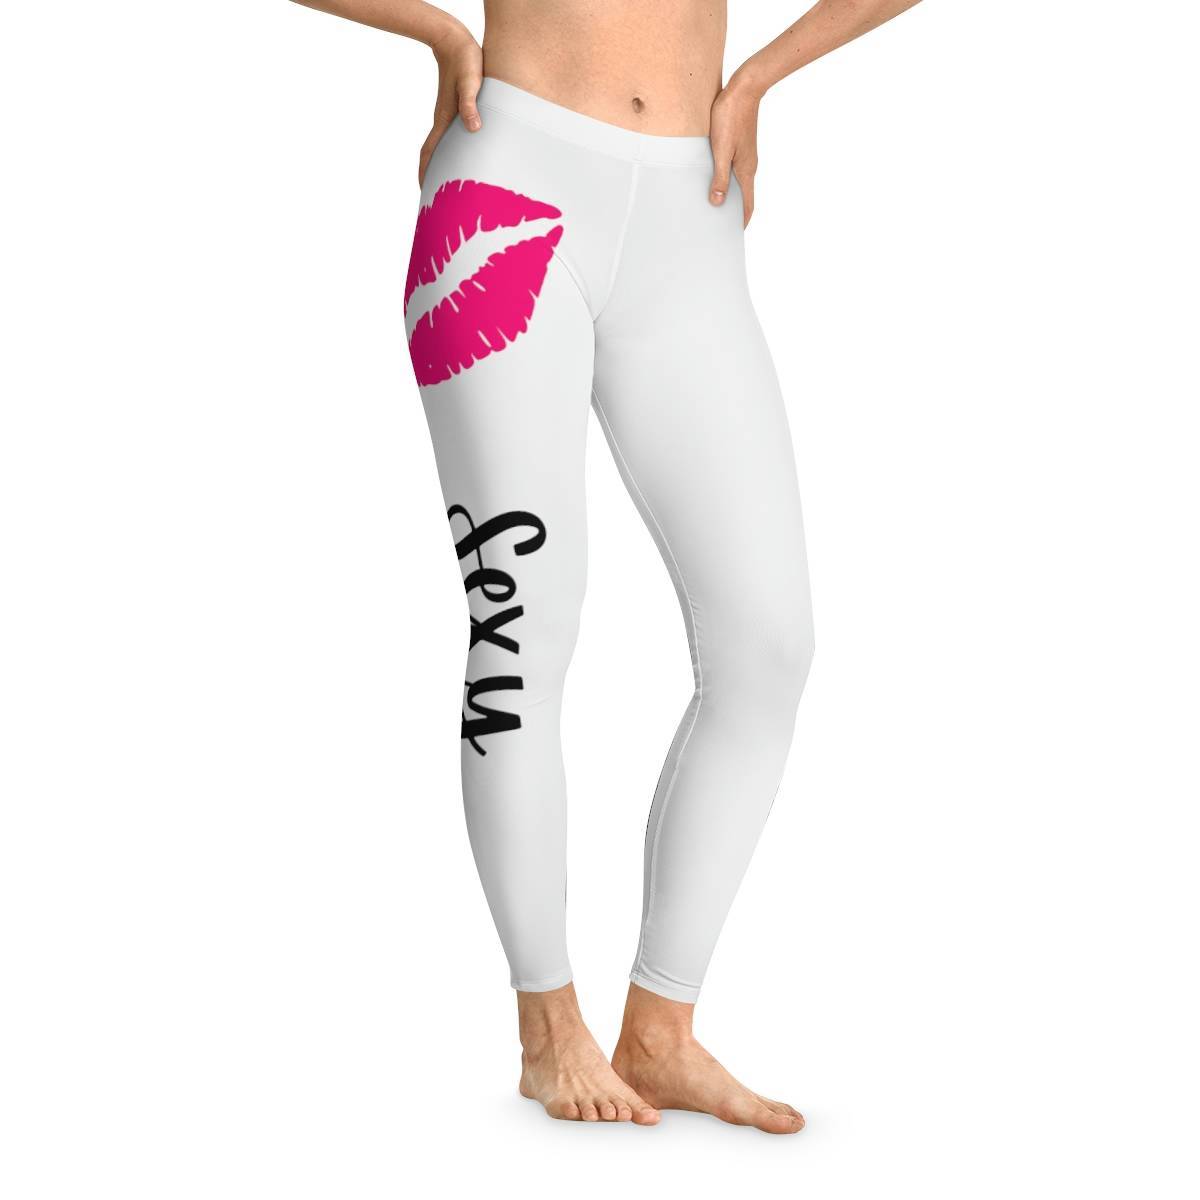 Camping SEXY Leggings, Comfortable And Flattering